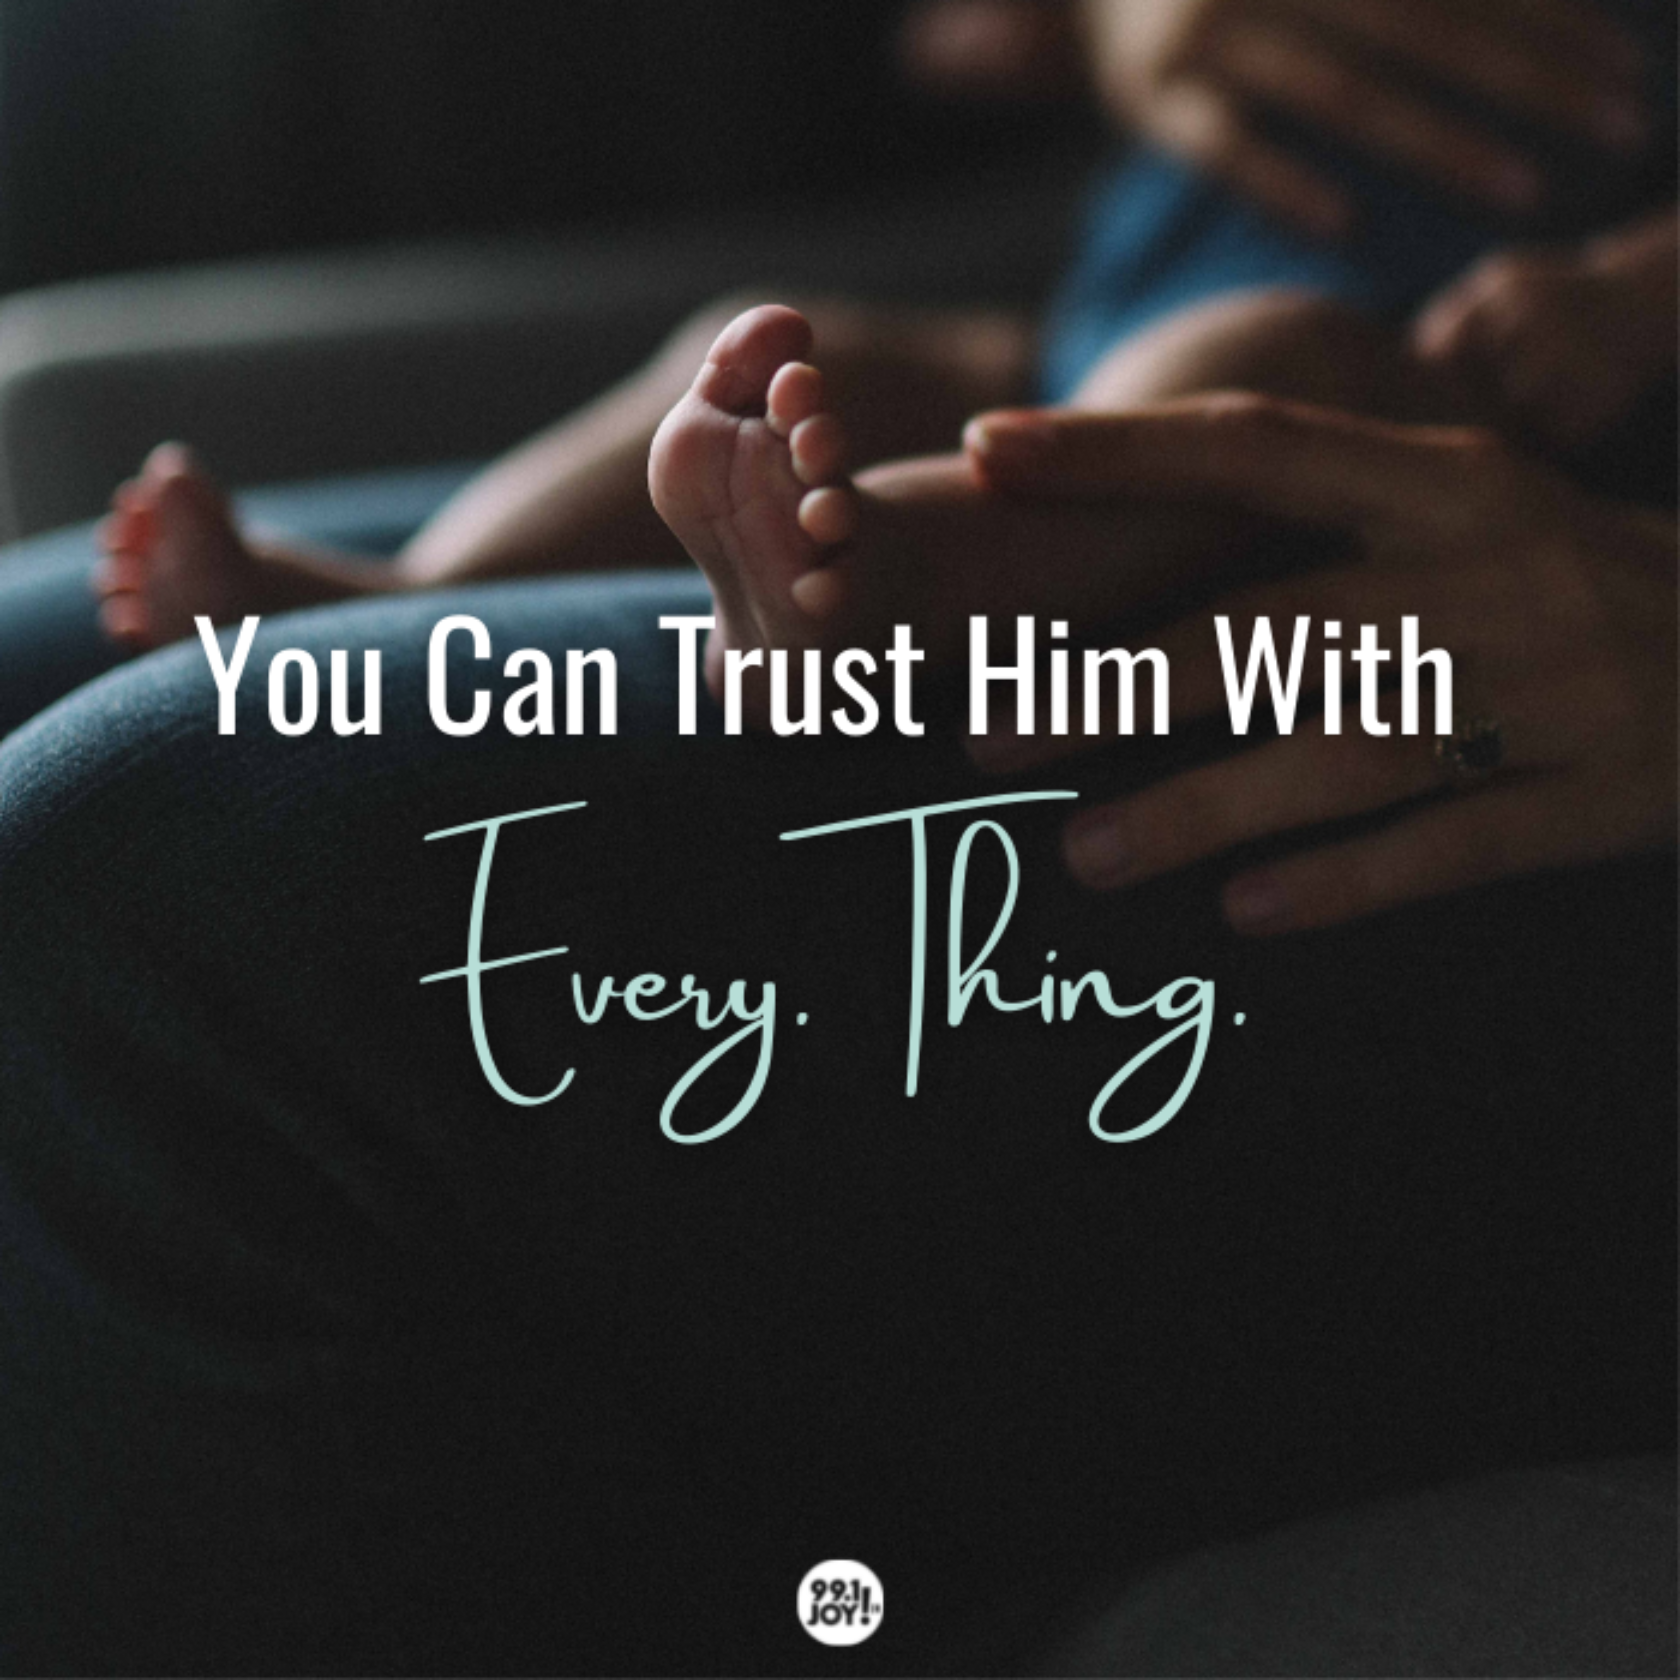 You Can Trust Him With Every.Thing.